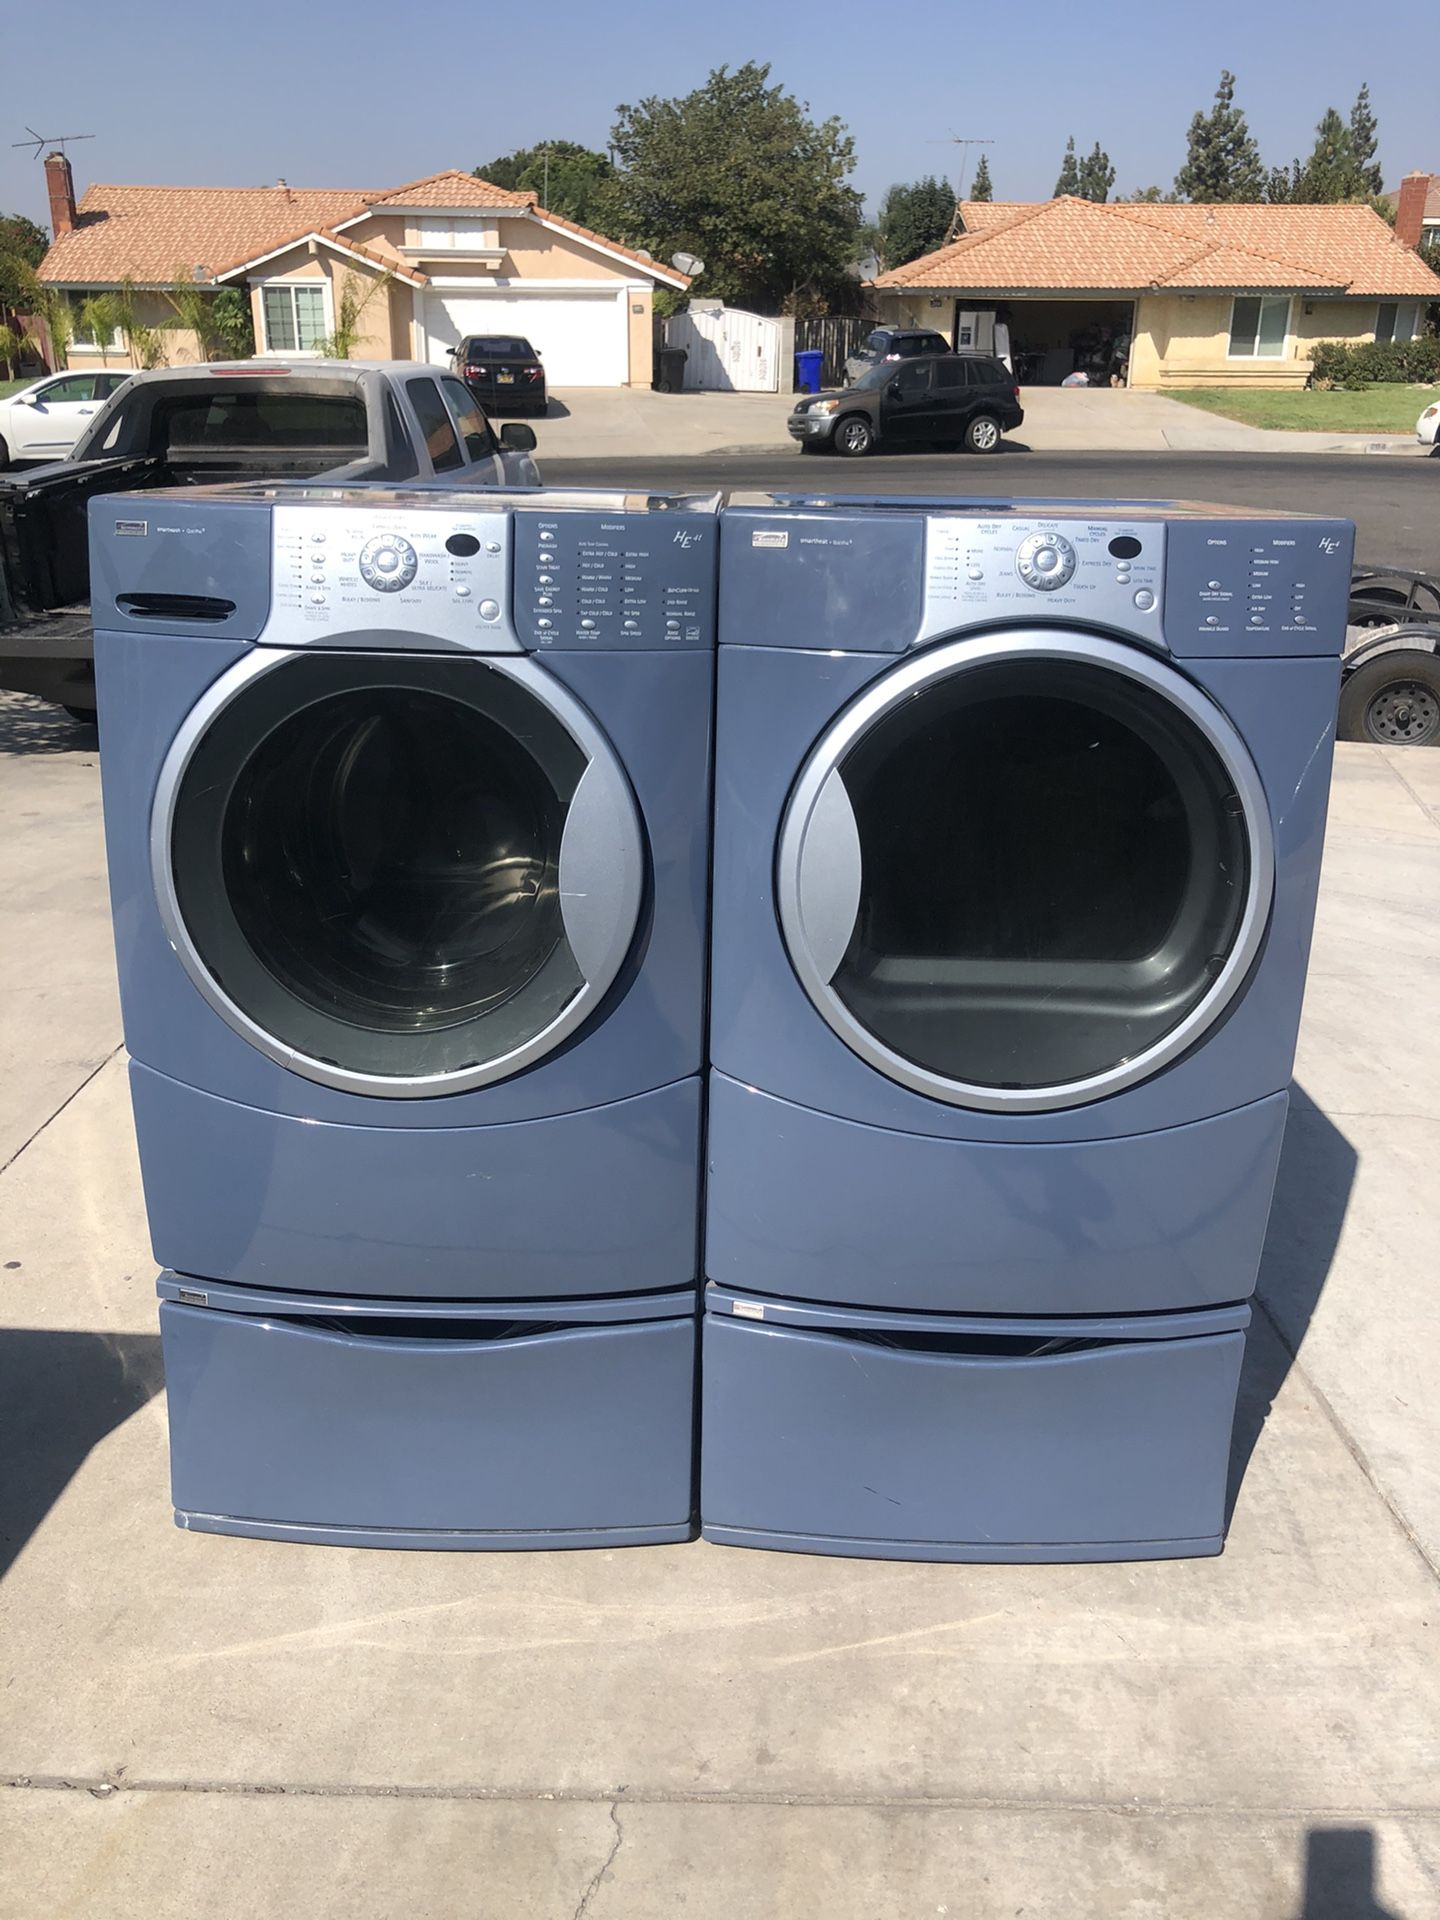 Kenmore elite washer and dryer gas heavy duty super capacity plus good condition deliver and installation available